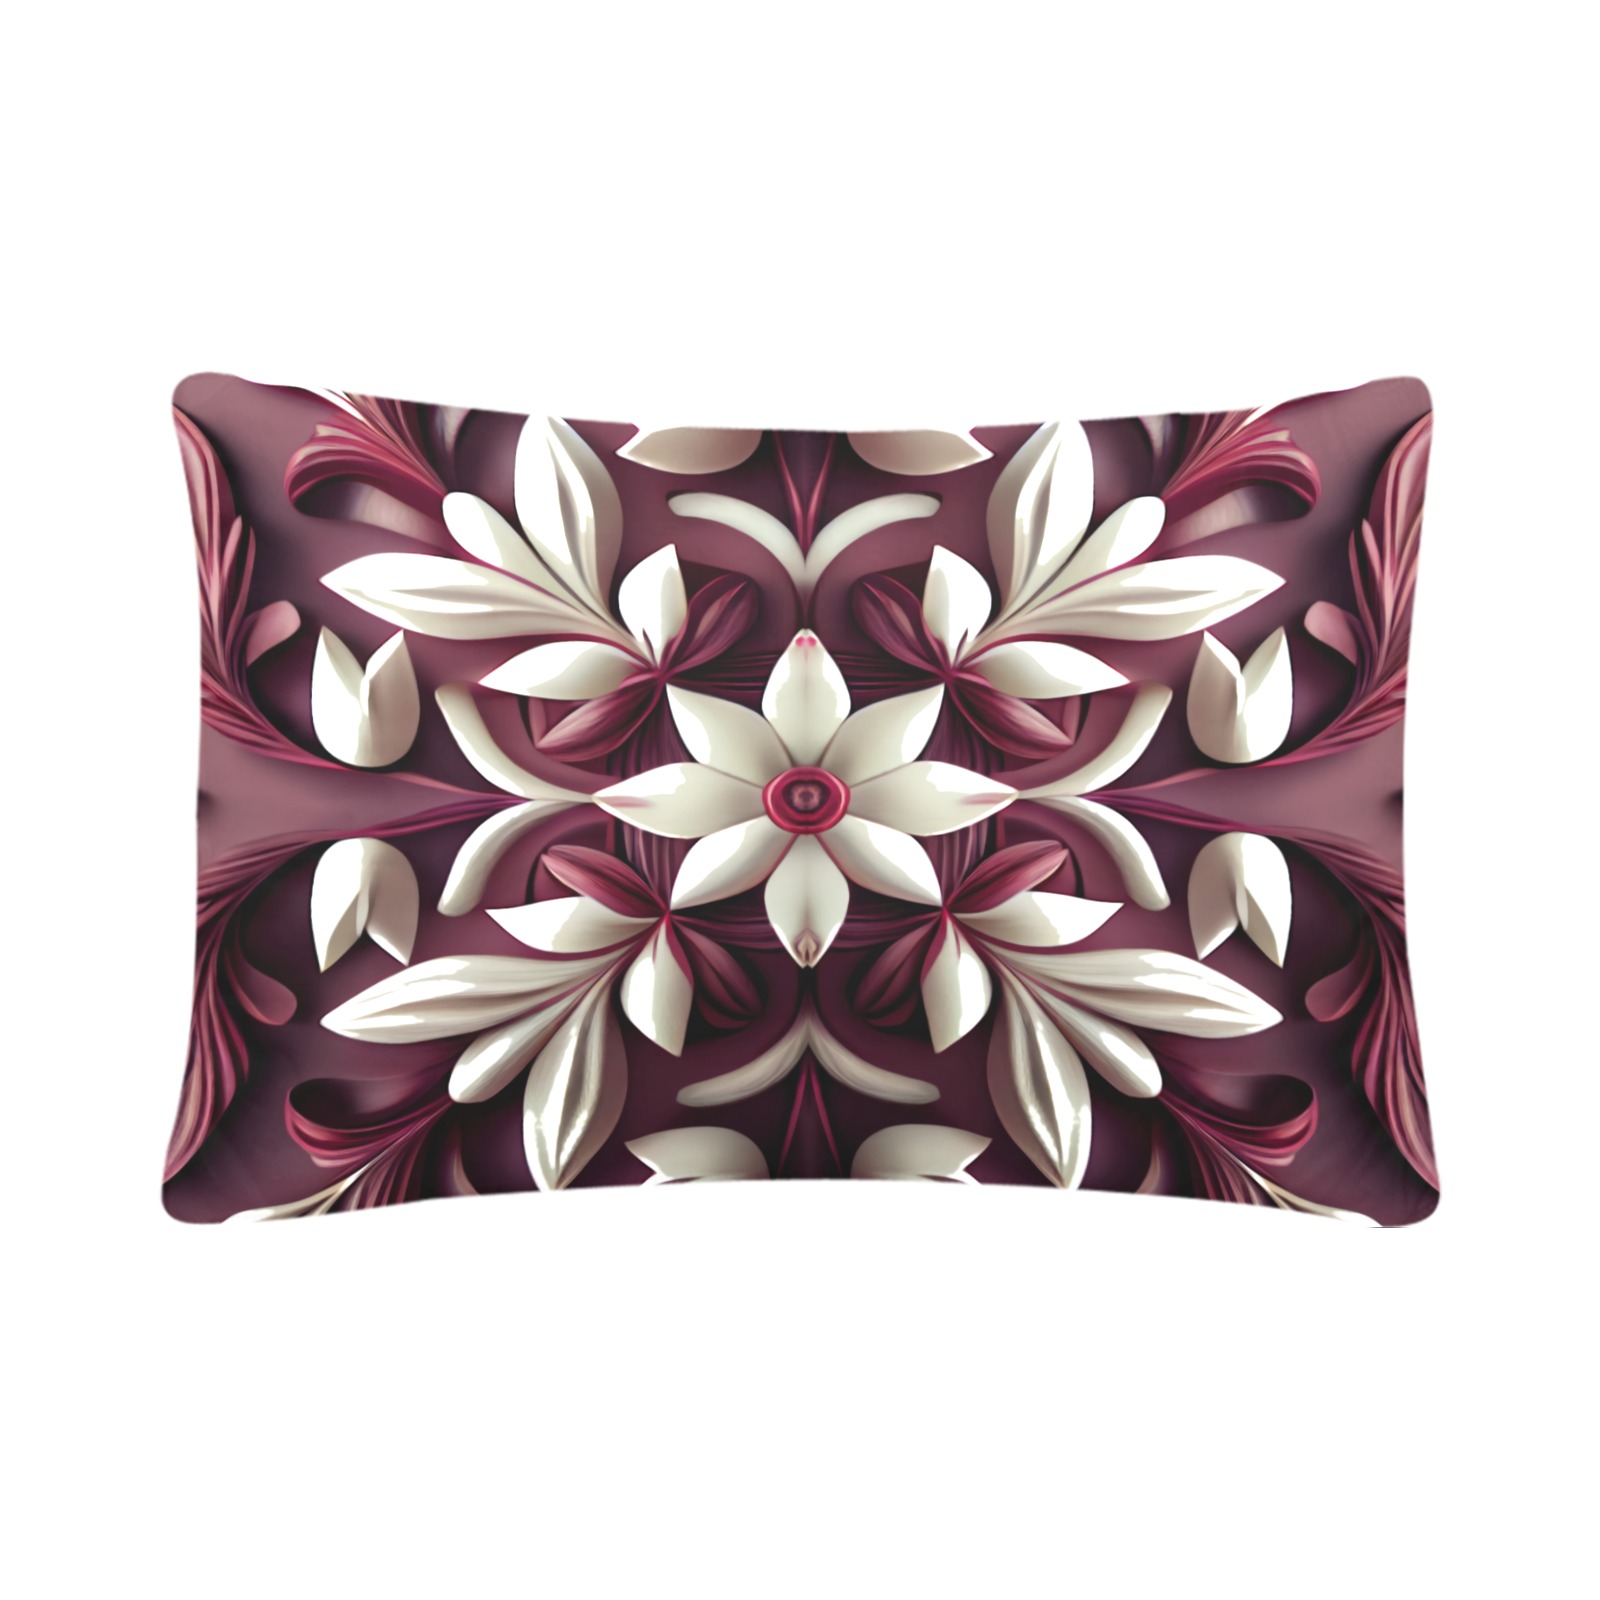 burgundy and white floral pattern Custom Pillow Case 20"x 30" (One Side) (Set of 2)